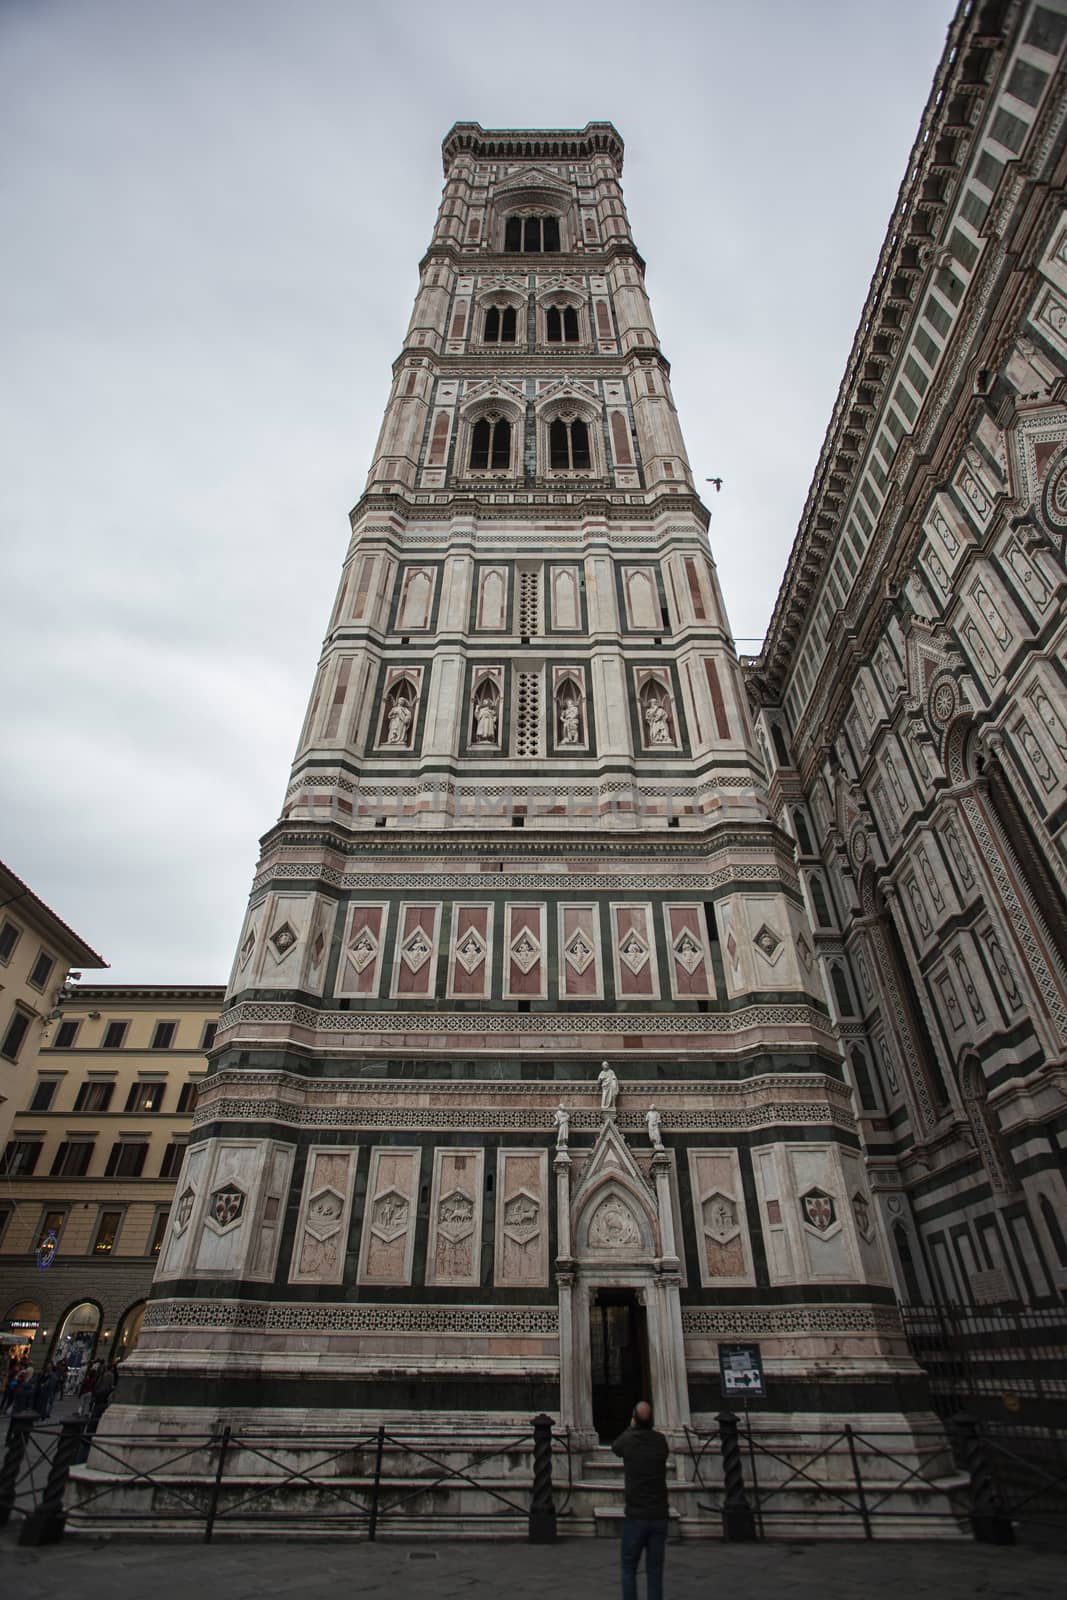 Detail of the bell tower of the Duomo of Florence by pippocarlot